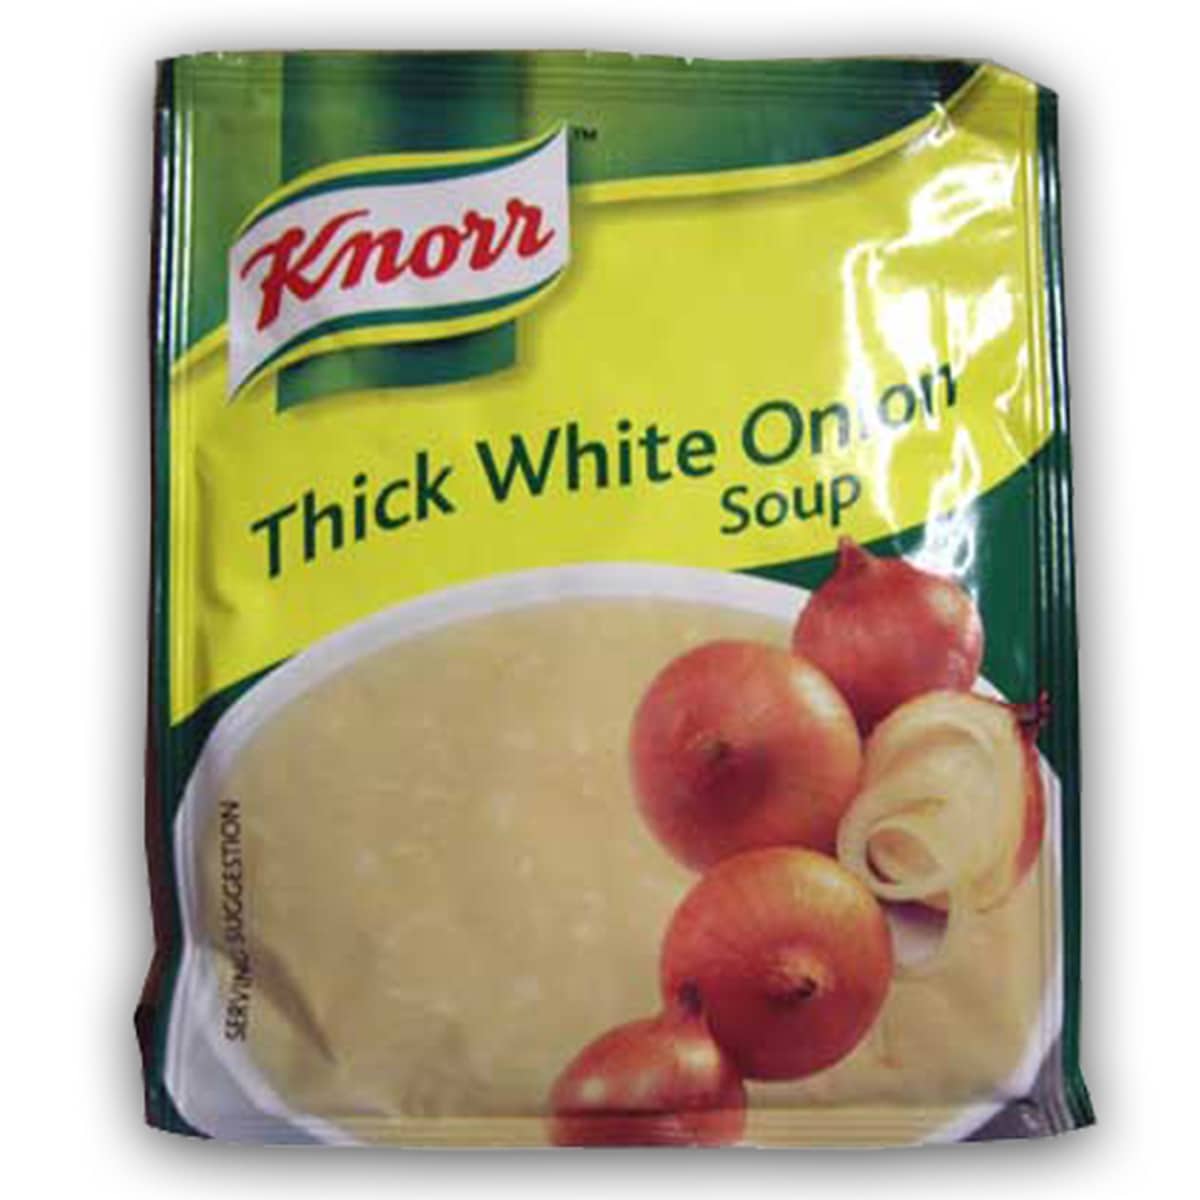 Buy Knorr Thick White Onion Soup - 45 gm